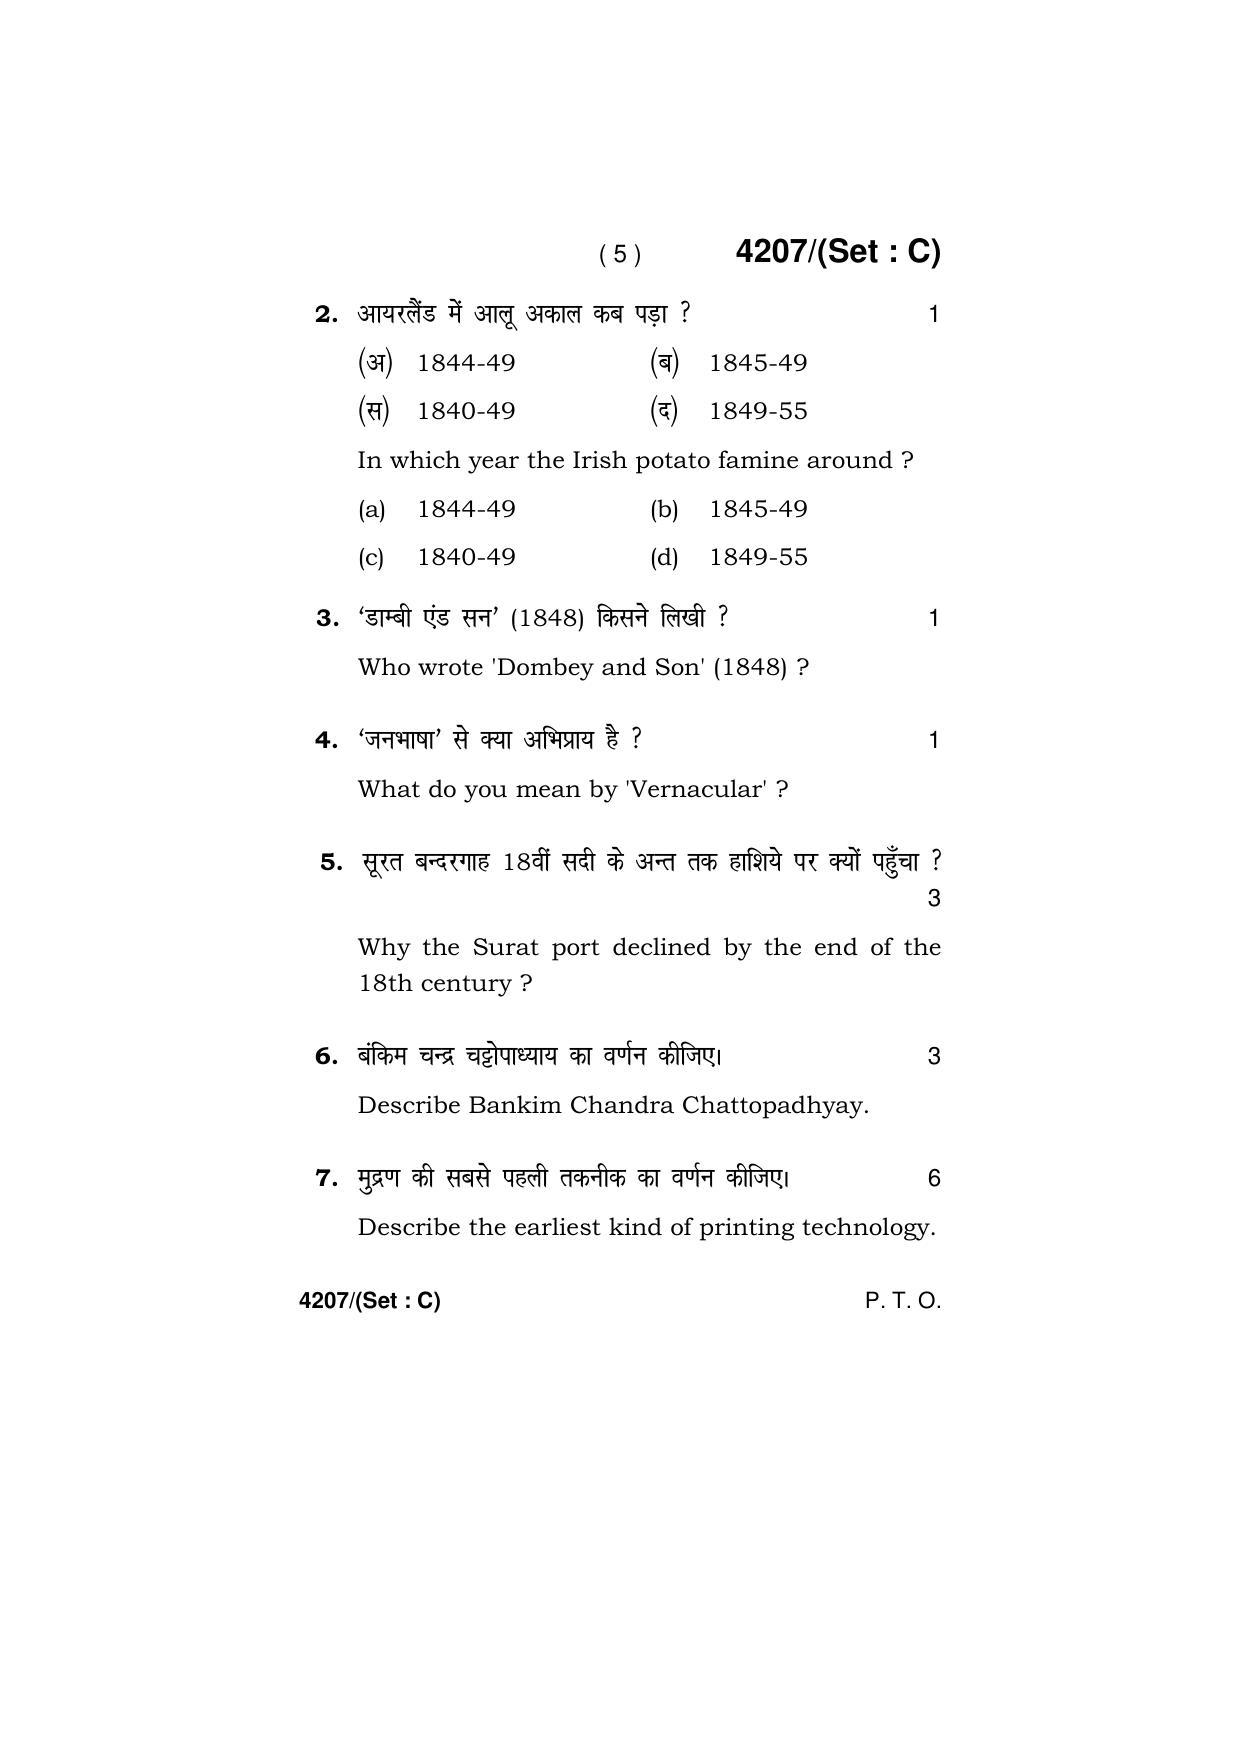 Haryana Board HBSE Class 10 Social Science (All Set) 2019 Question Paper - Page 35